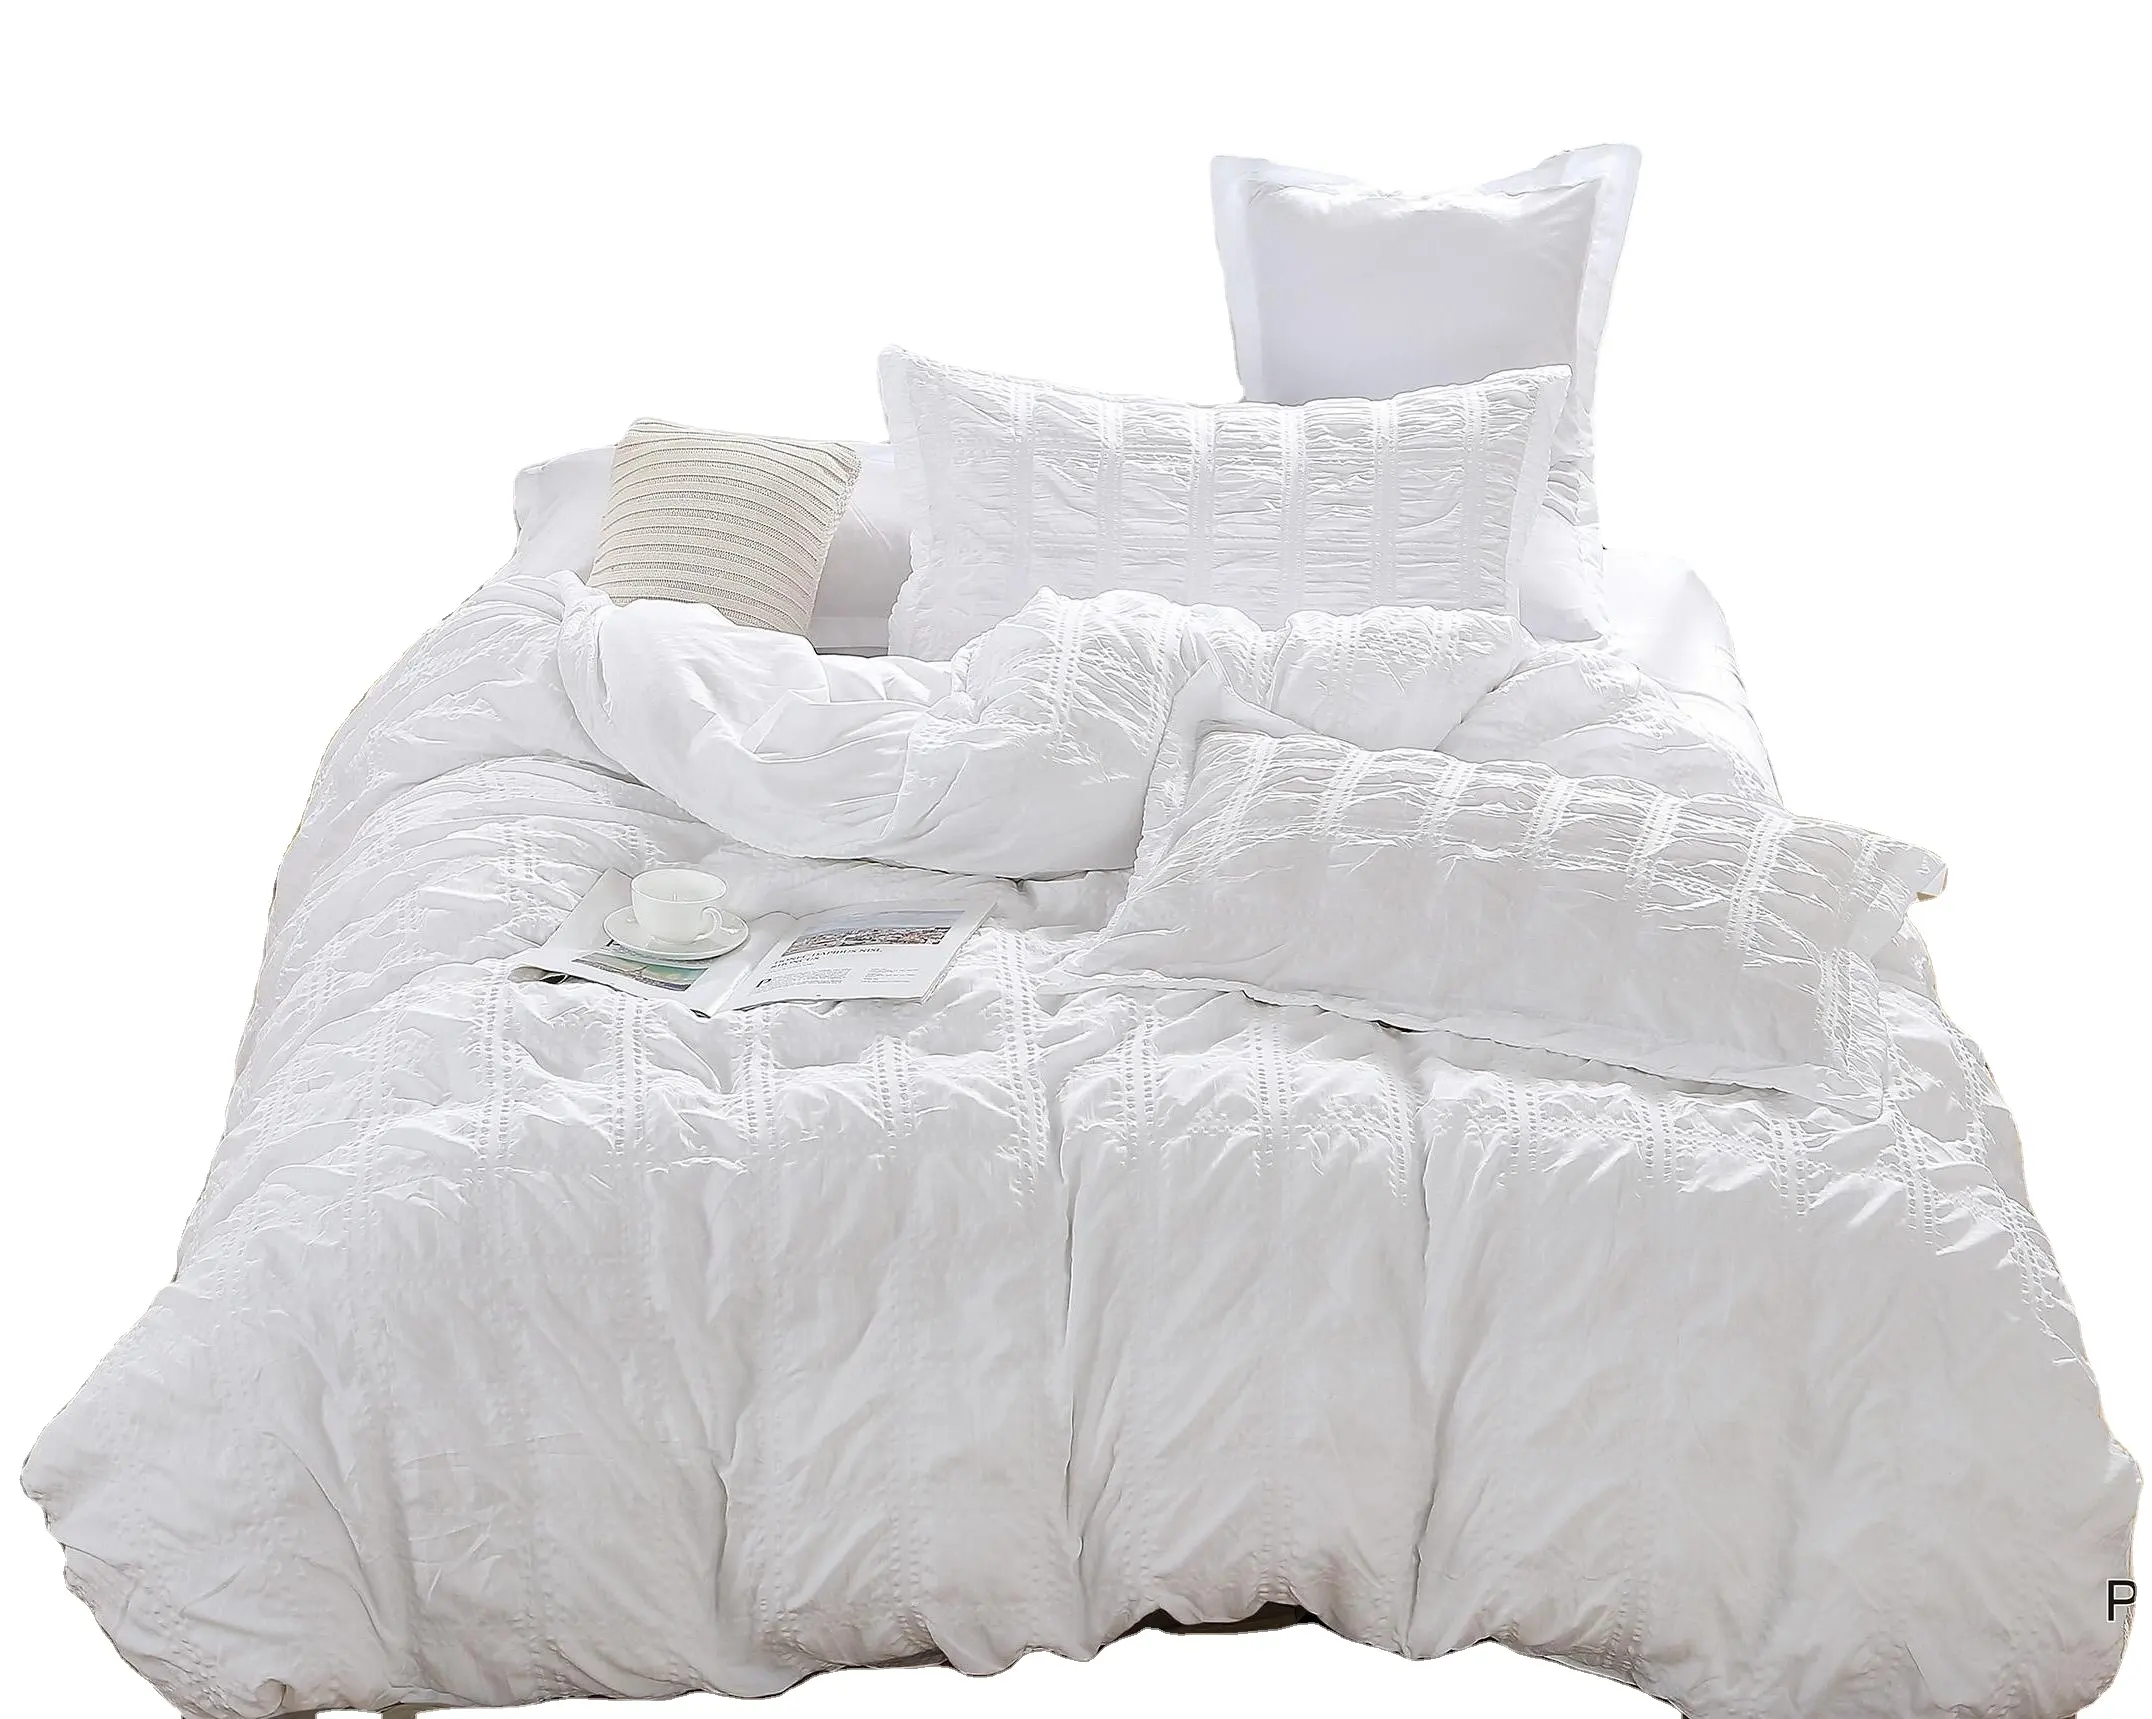 Factory directly supply seersucker white color duvet cover set customize acceptable home hotel adult